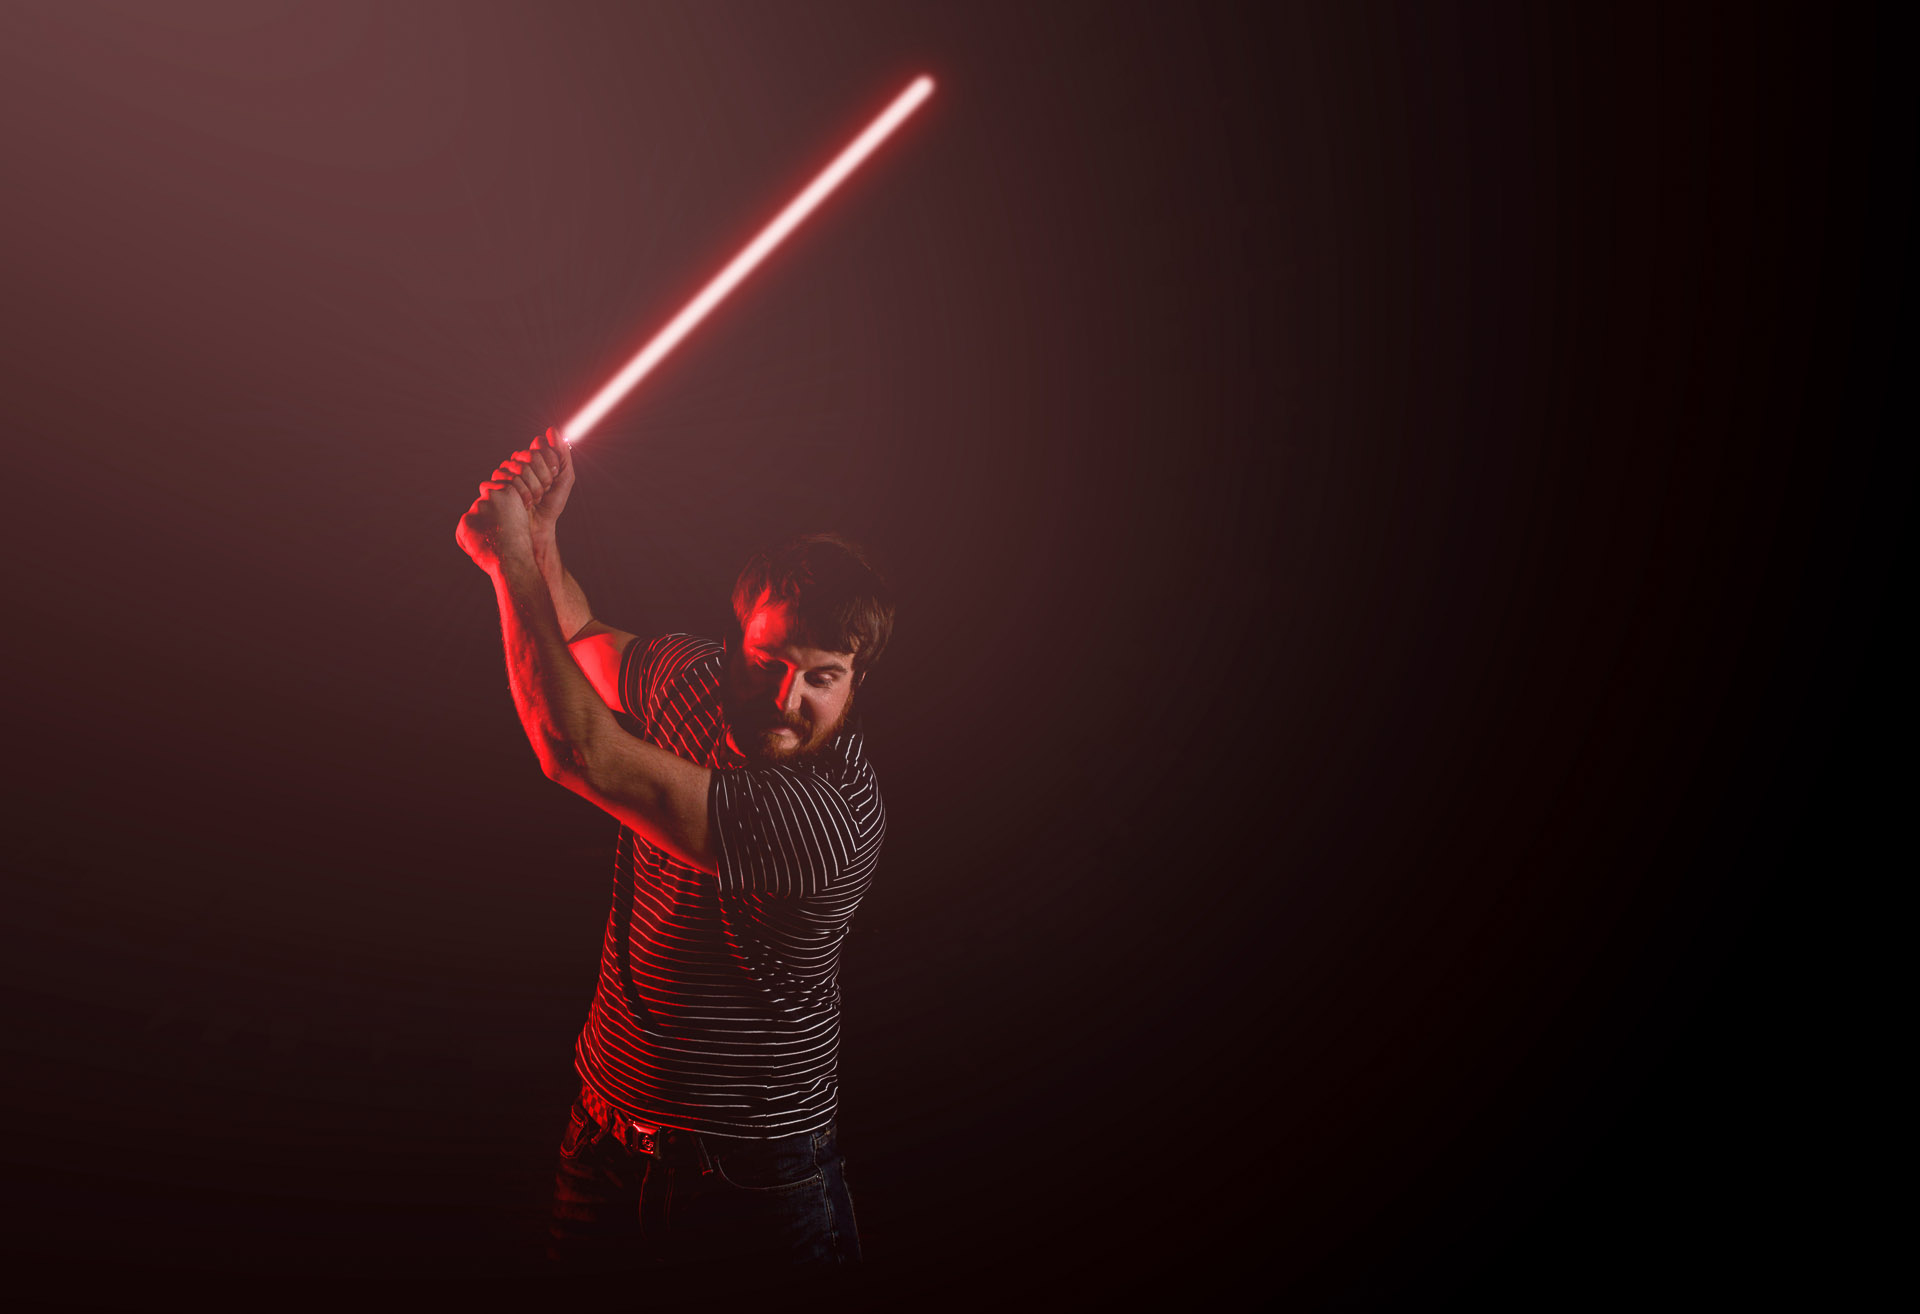 Tutorial and behind the scenes on how to make a lightsaber portrait picture